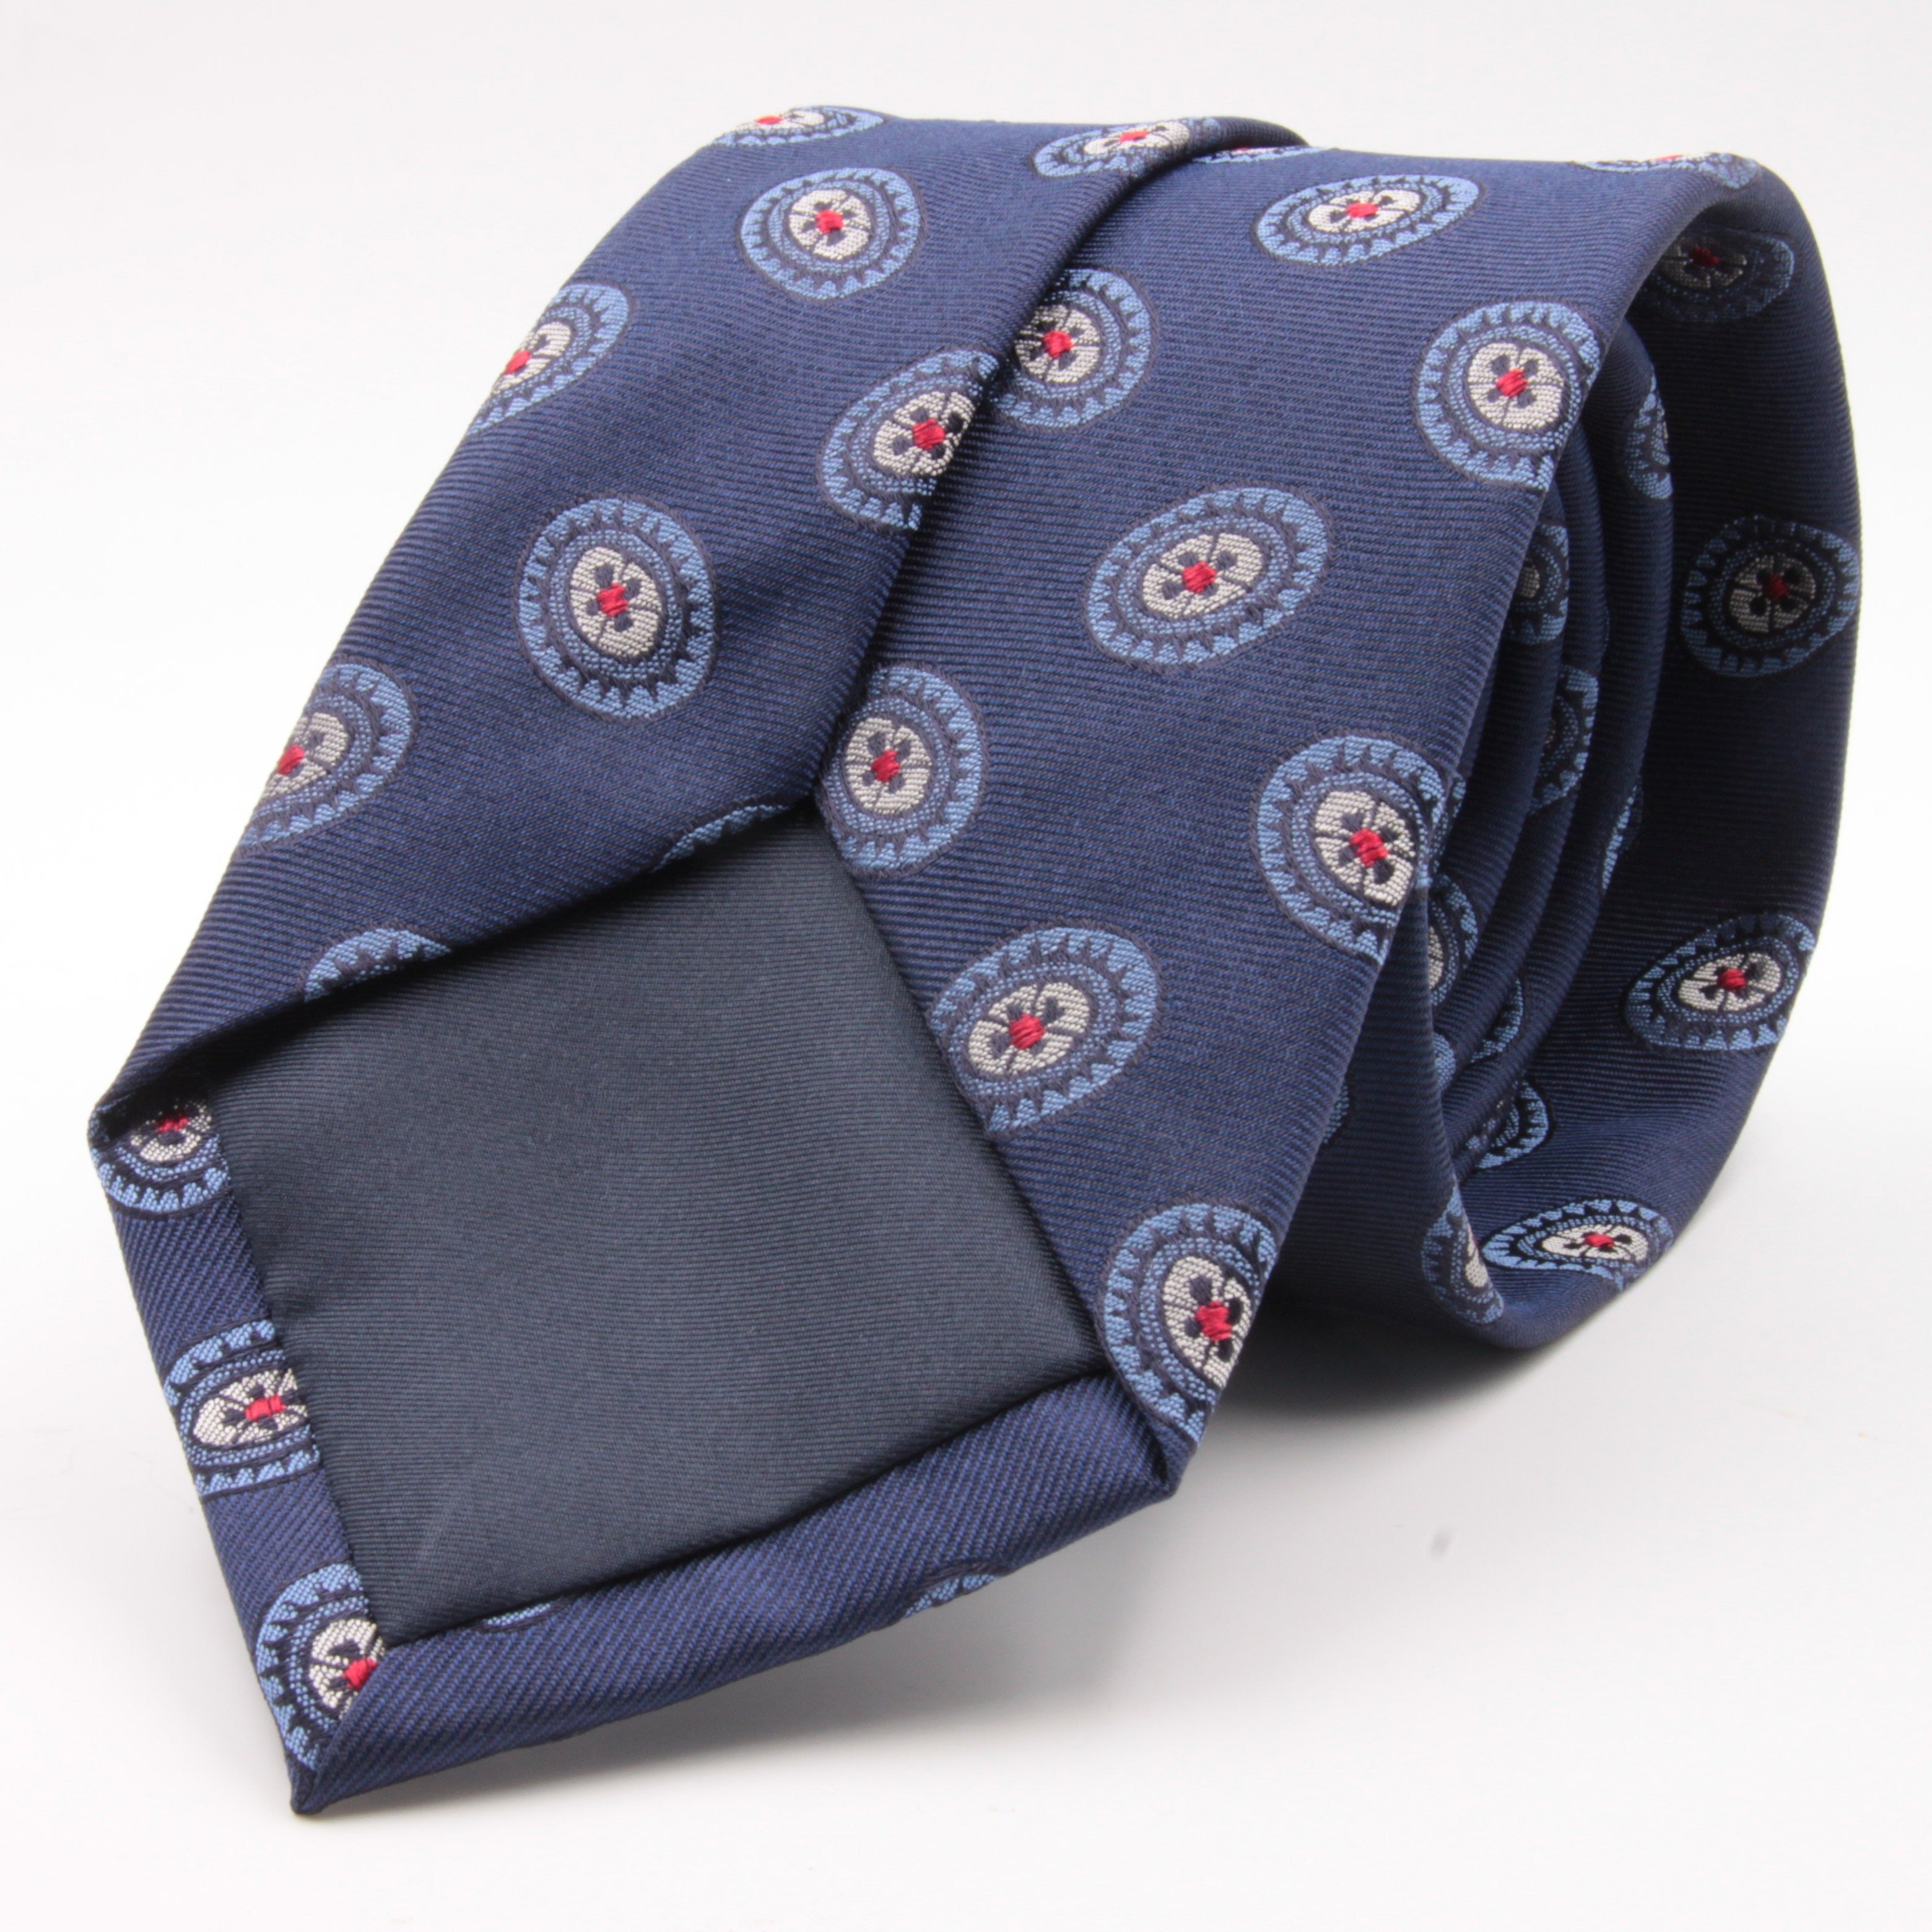 Cruciani & Bella 100% Silk Jacquard  Blue, Light Blue, Red and White Medallions Tie Handmade in Italy 8 cm x 150 cm #3779  